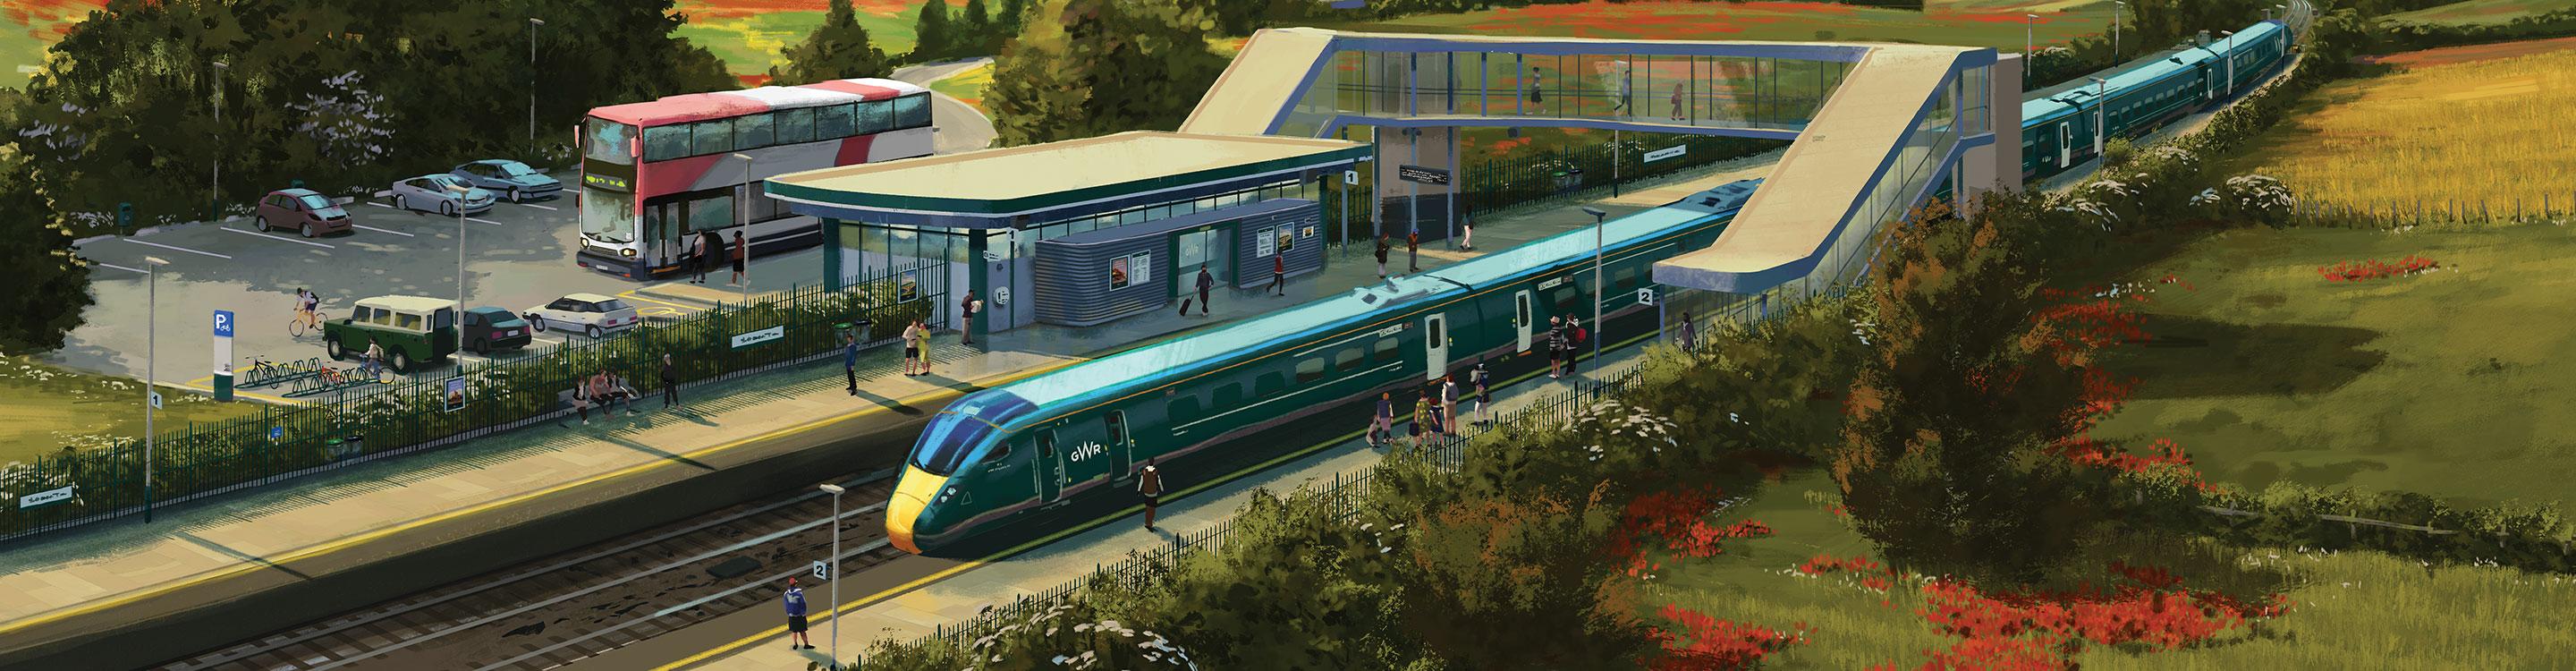 illustration of a GWR train at a station with bus in background